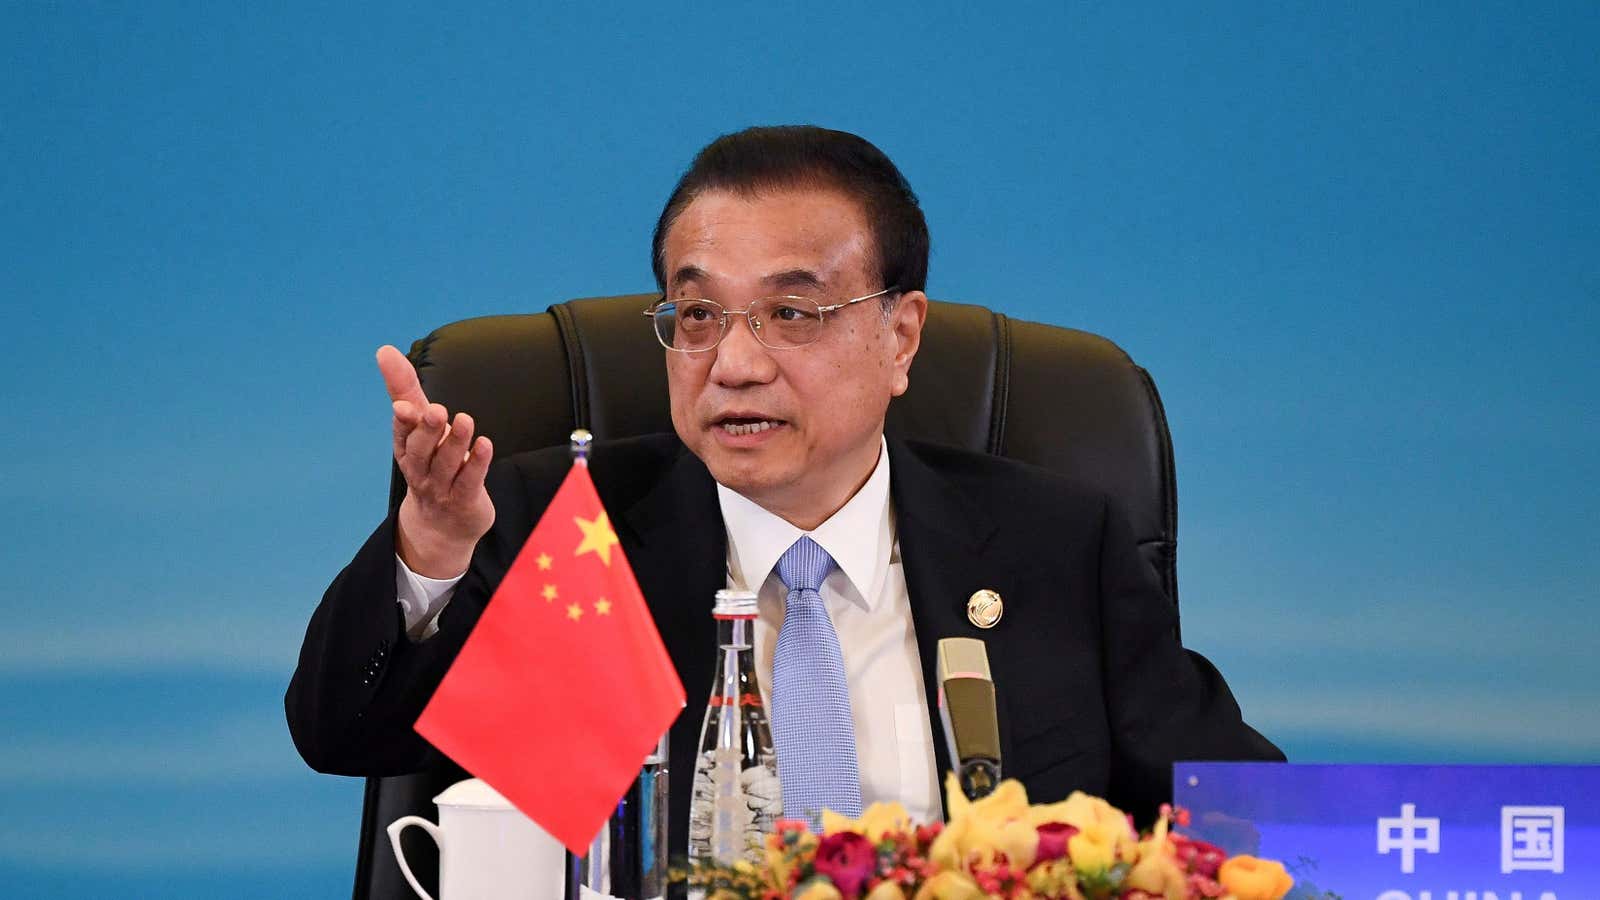 China’s premier Li Keqiang spoke with UK business leaders today.